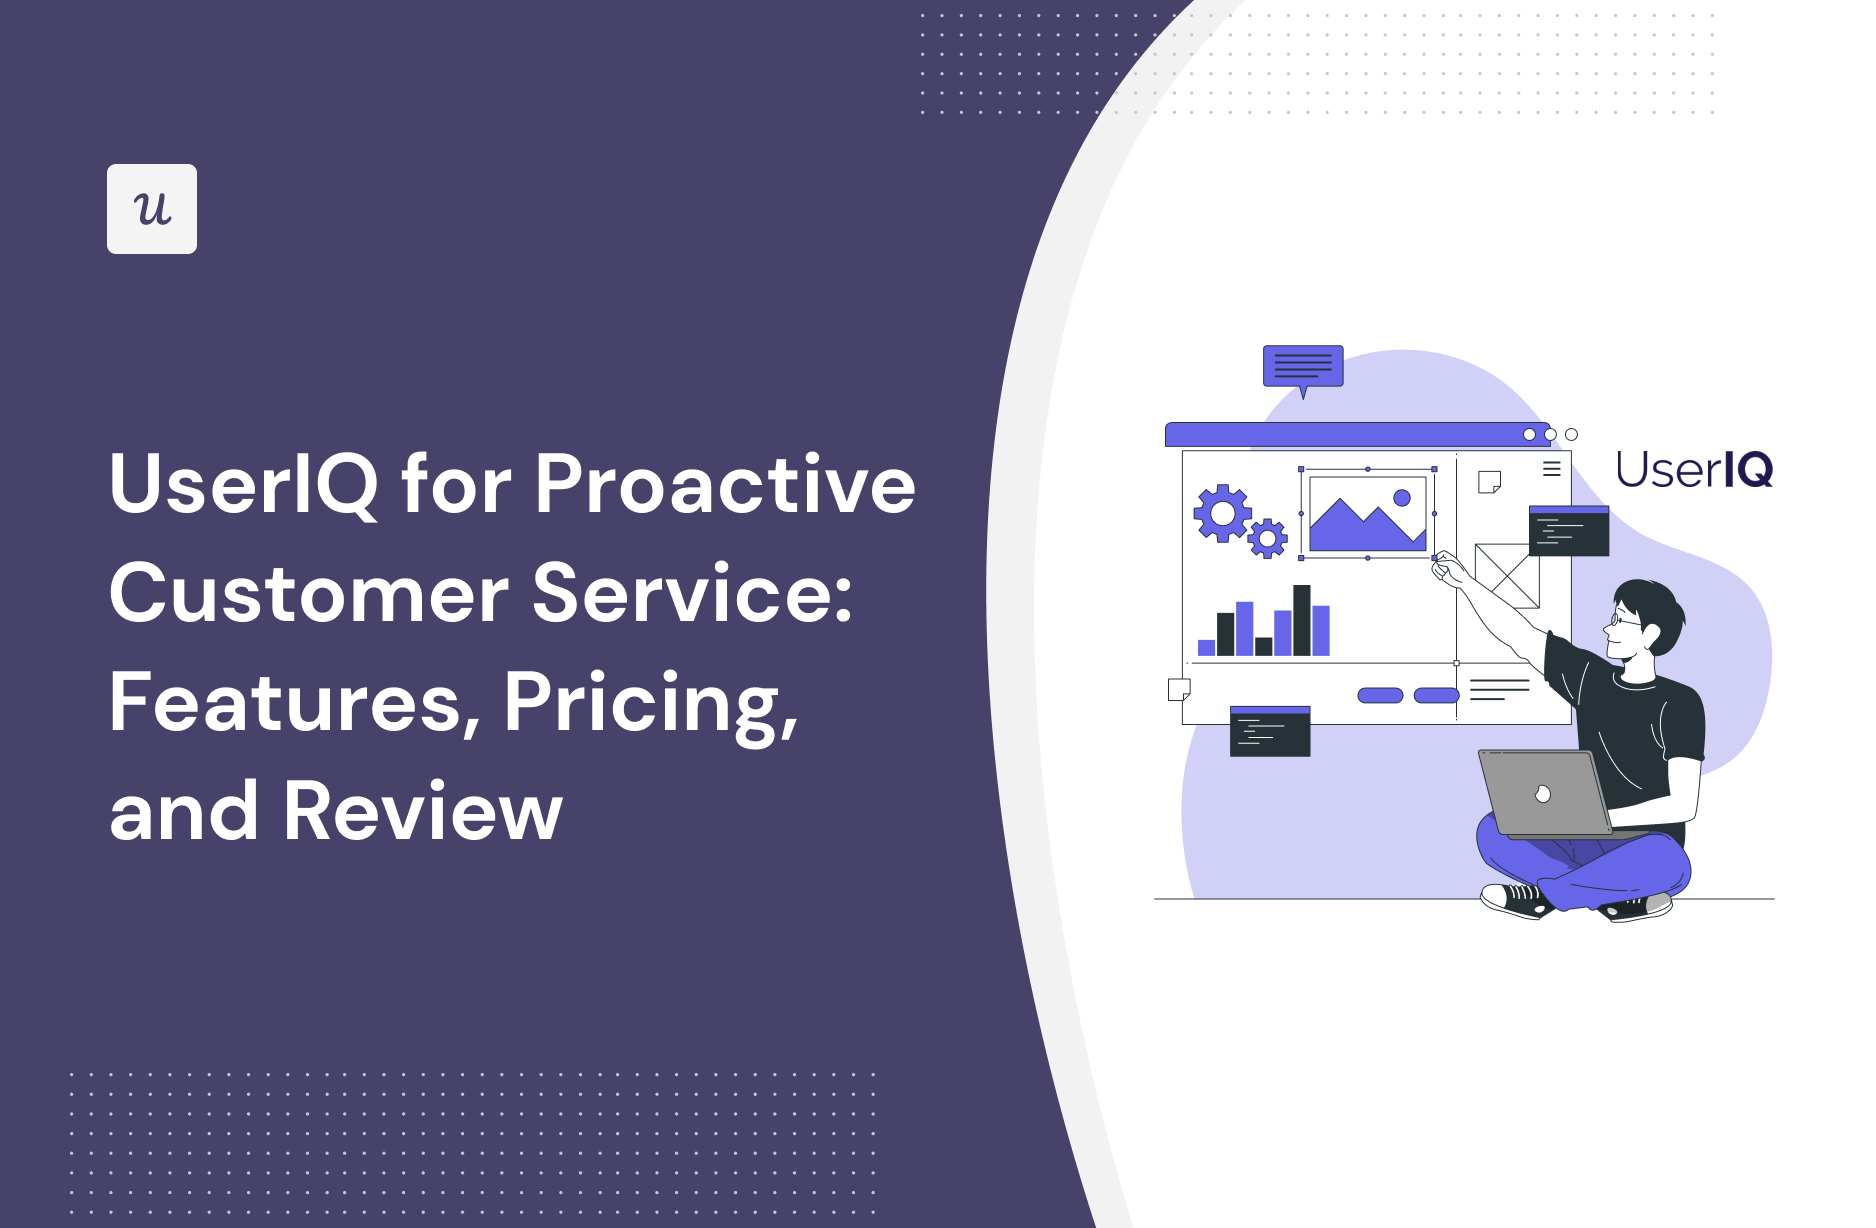 UserIQ for Proactive Customer Service: Features, Pricing, and Review